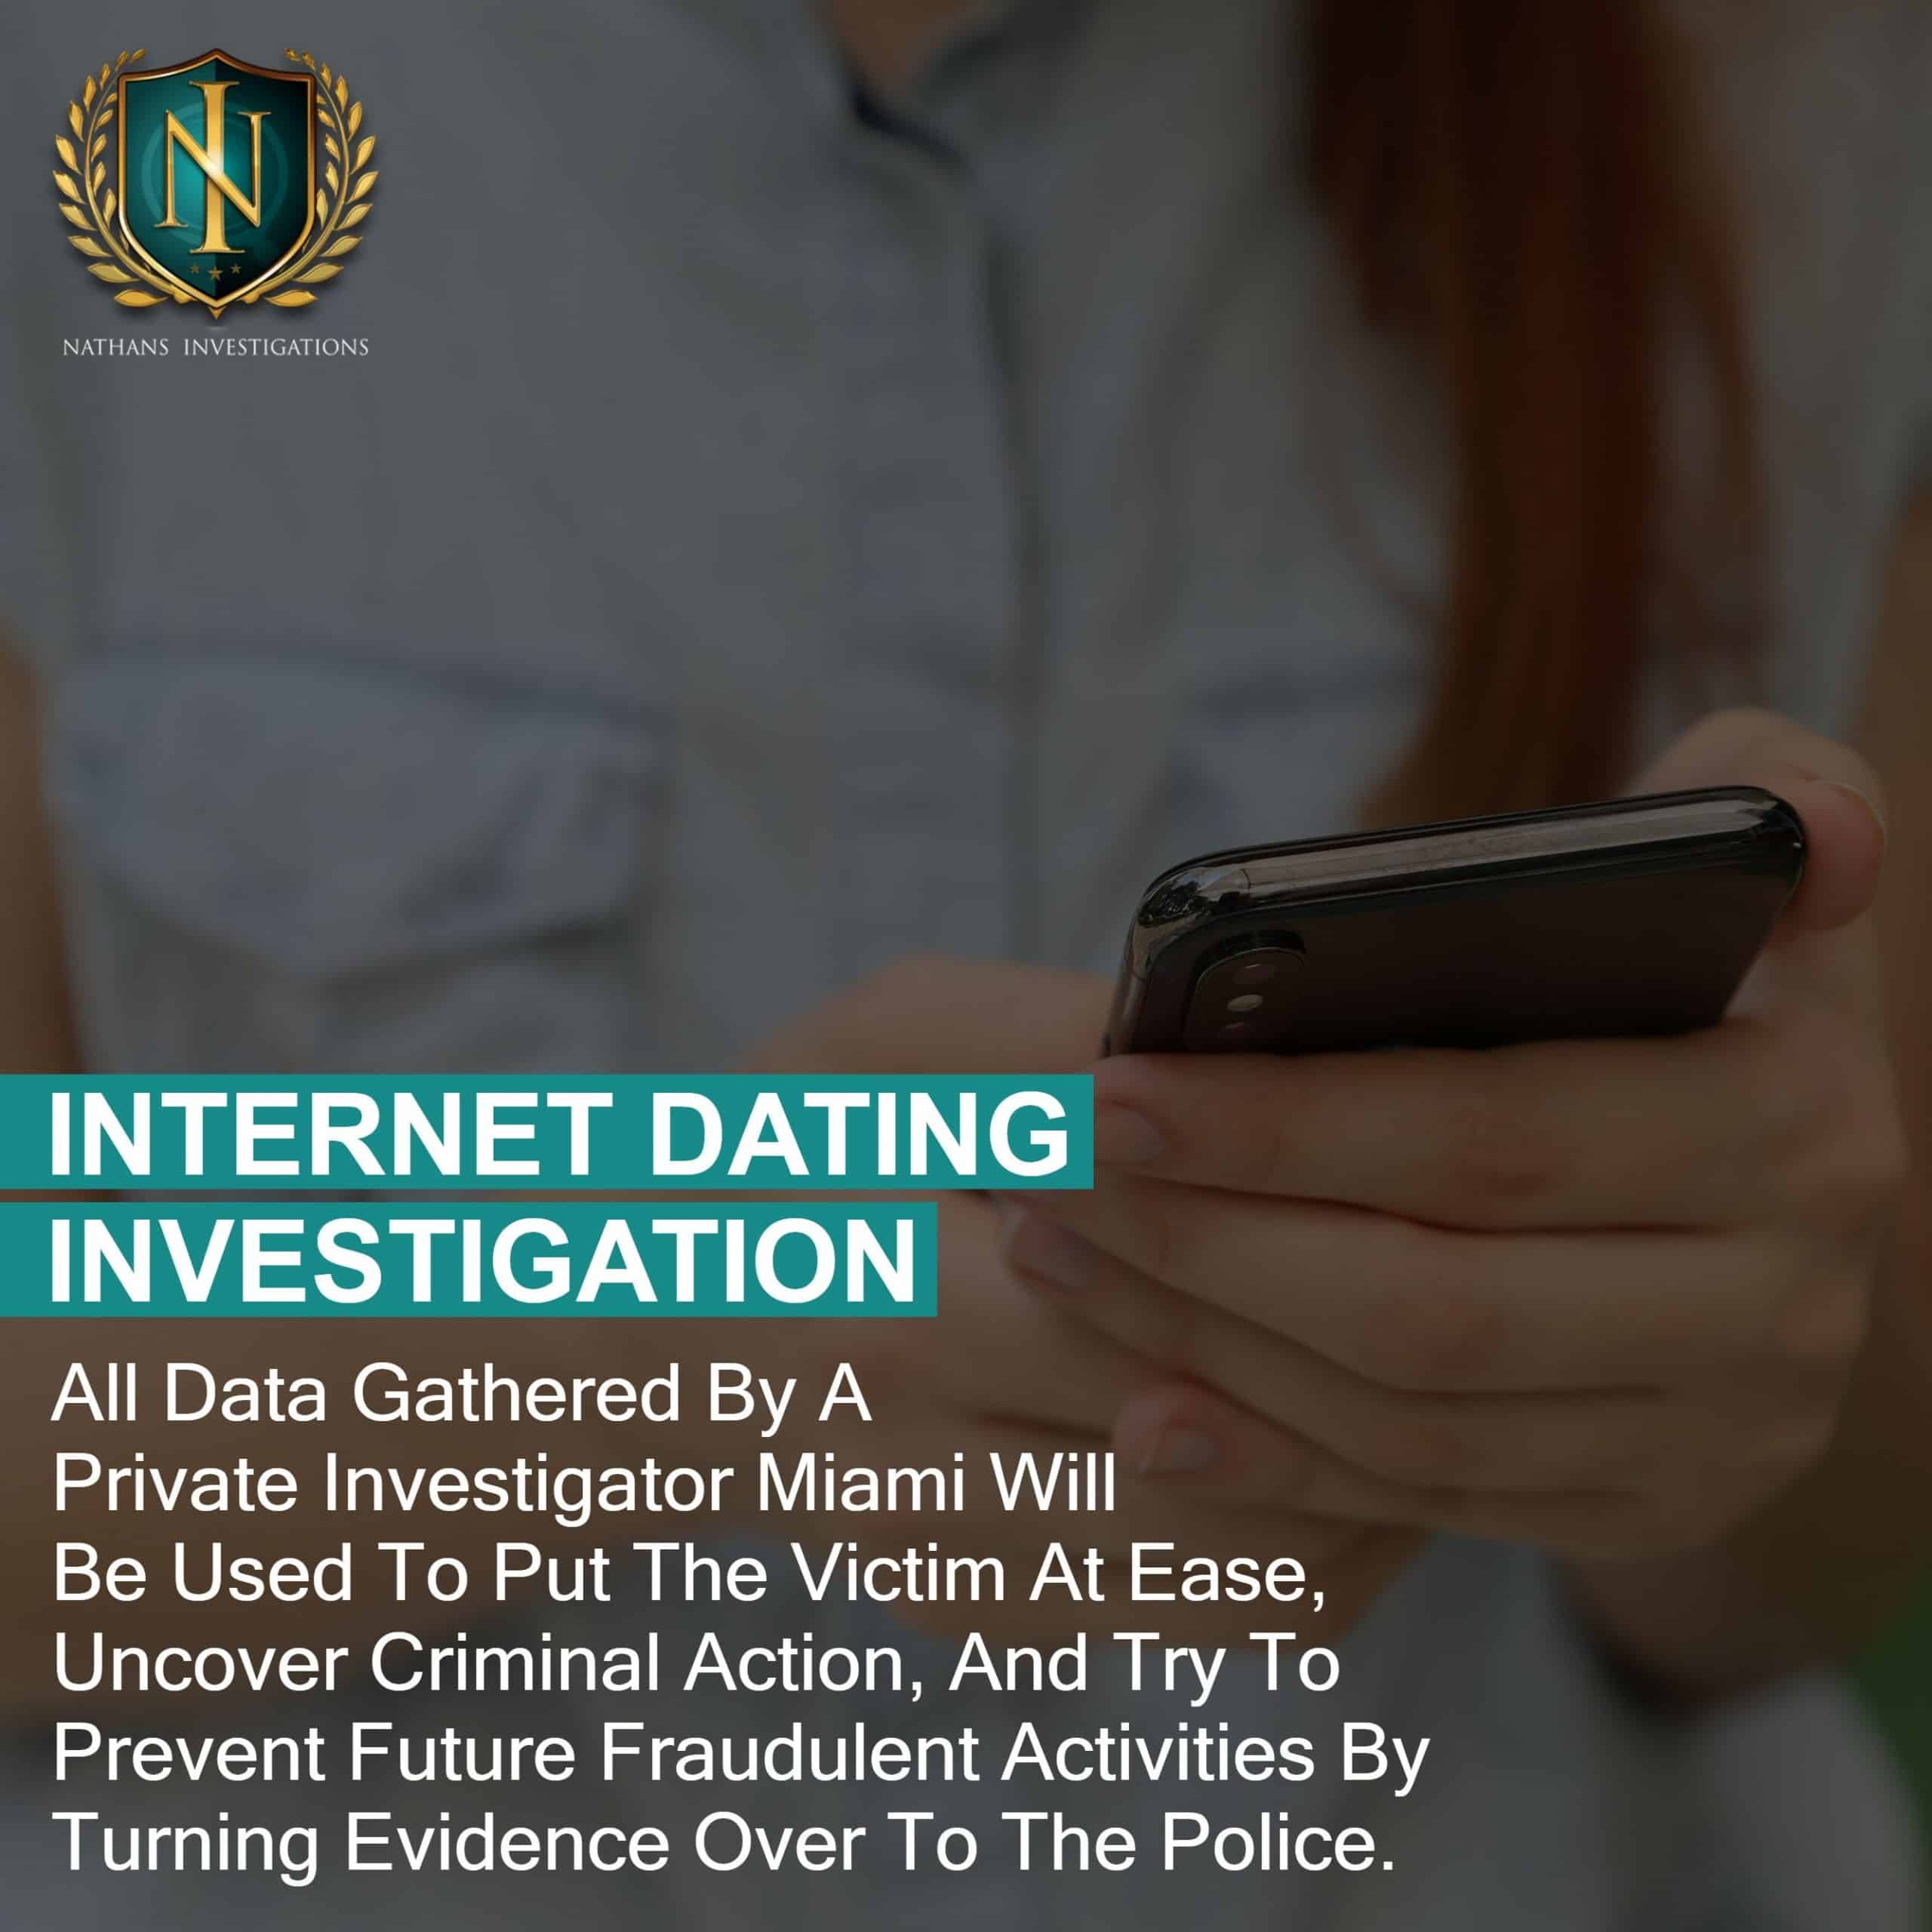 All data gathered by a private investigator Miami will be used to put ...